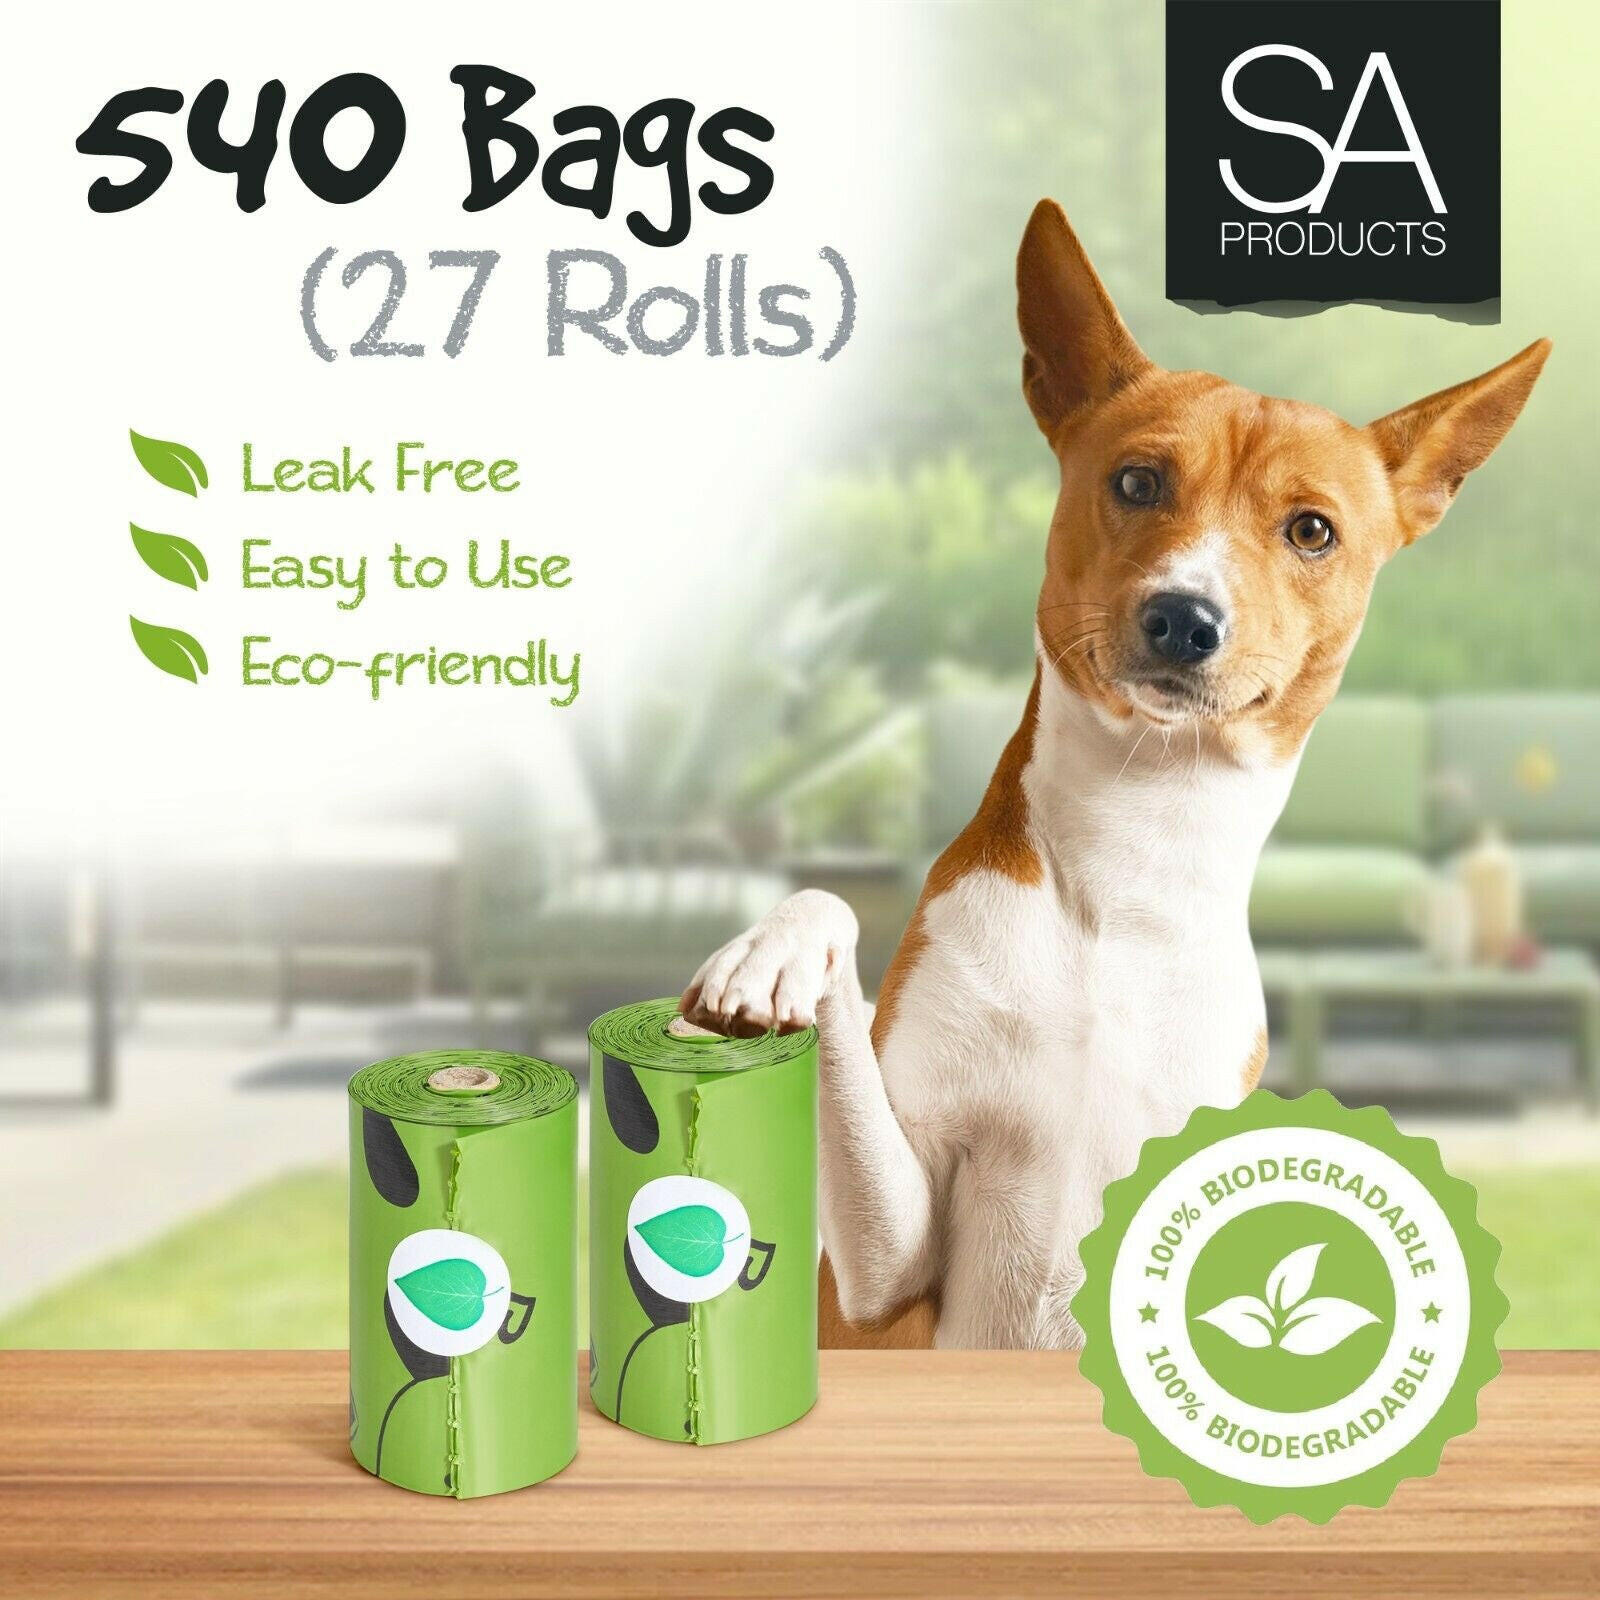 Pack of 540 Biodegradable Large Dog Waste Bag Refills, Environmentally Friendly and Durable